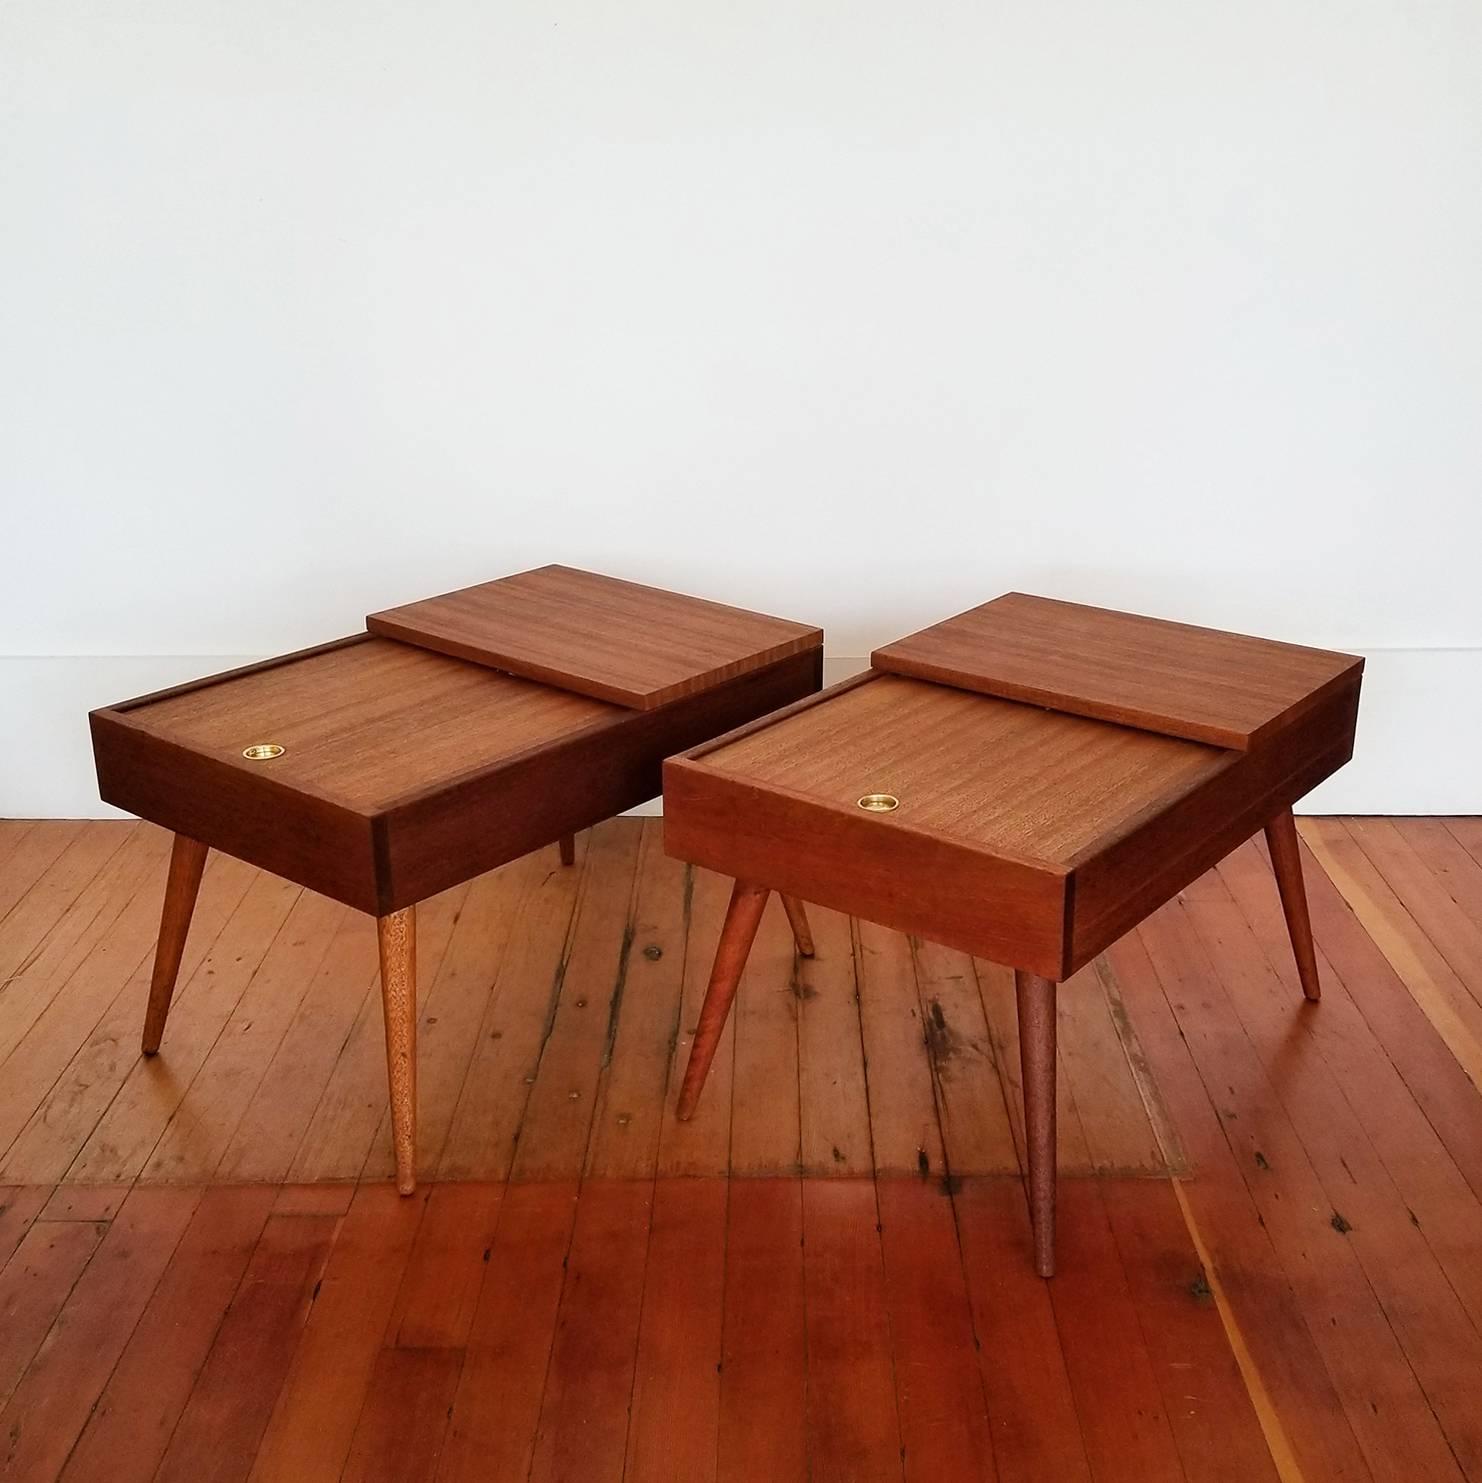 A pair of end tables with sliding door access to storage. Shimmering solid Philippine mahogany construction. Designed by California Designer, John Keal. Signed with a 1950s Brown Saltman logo.